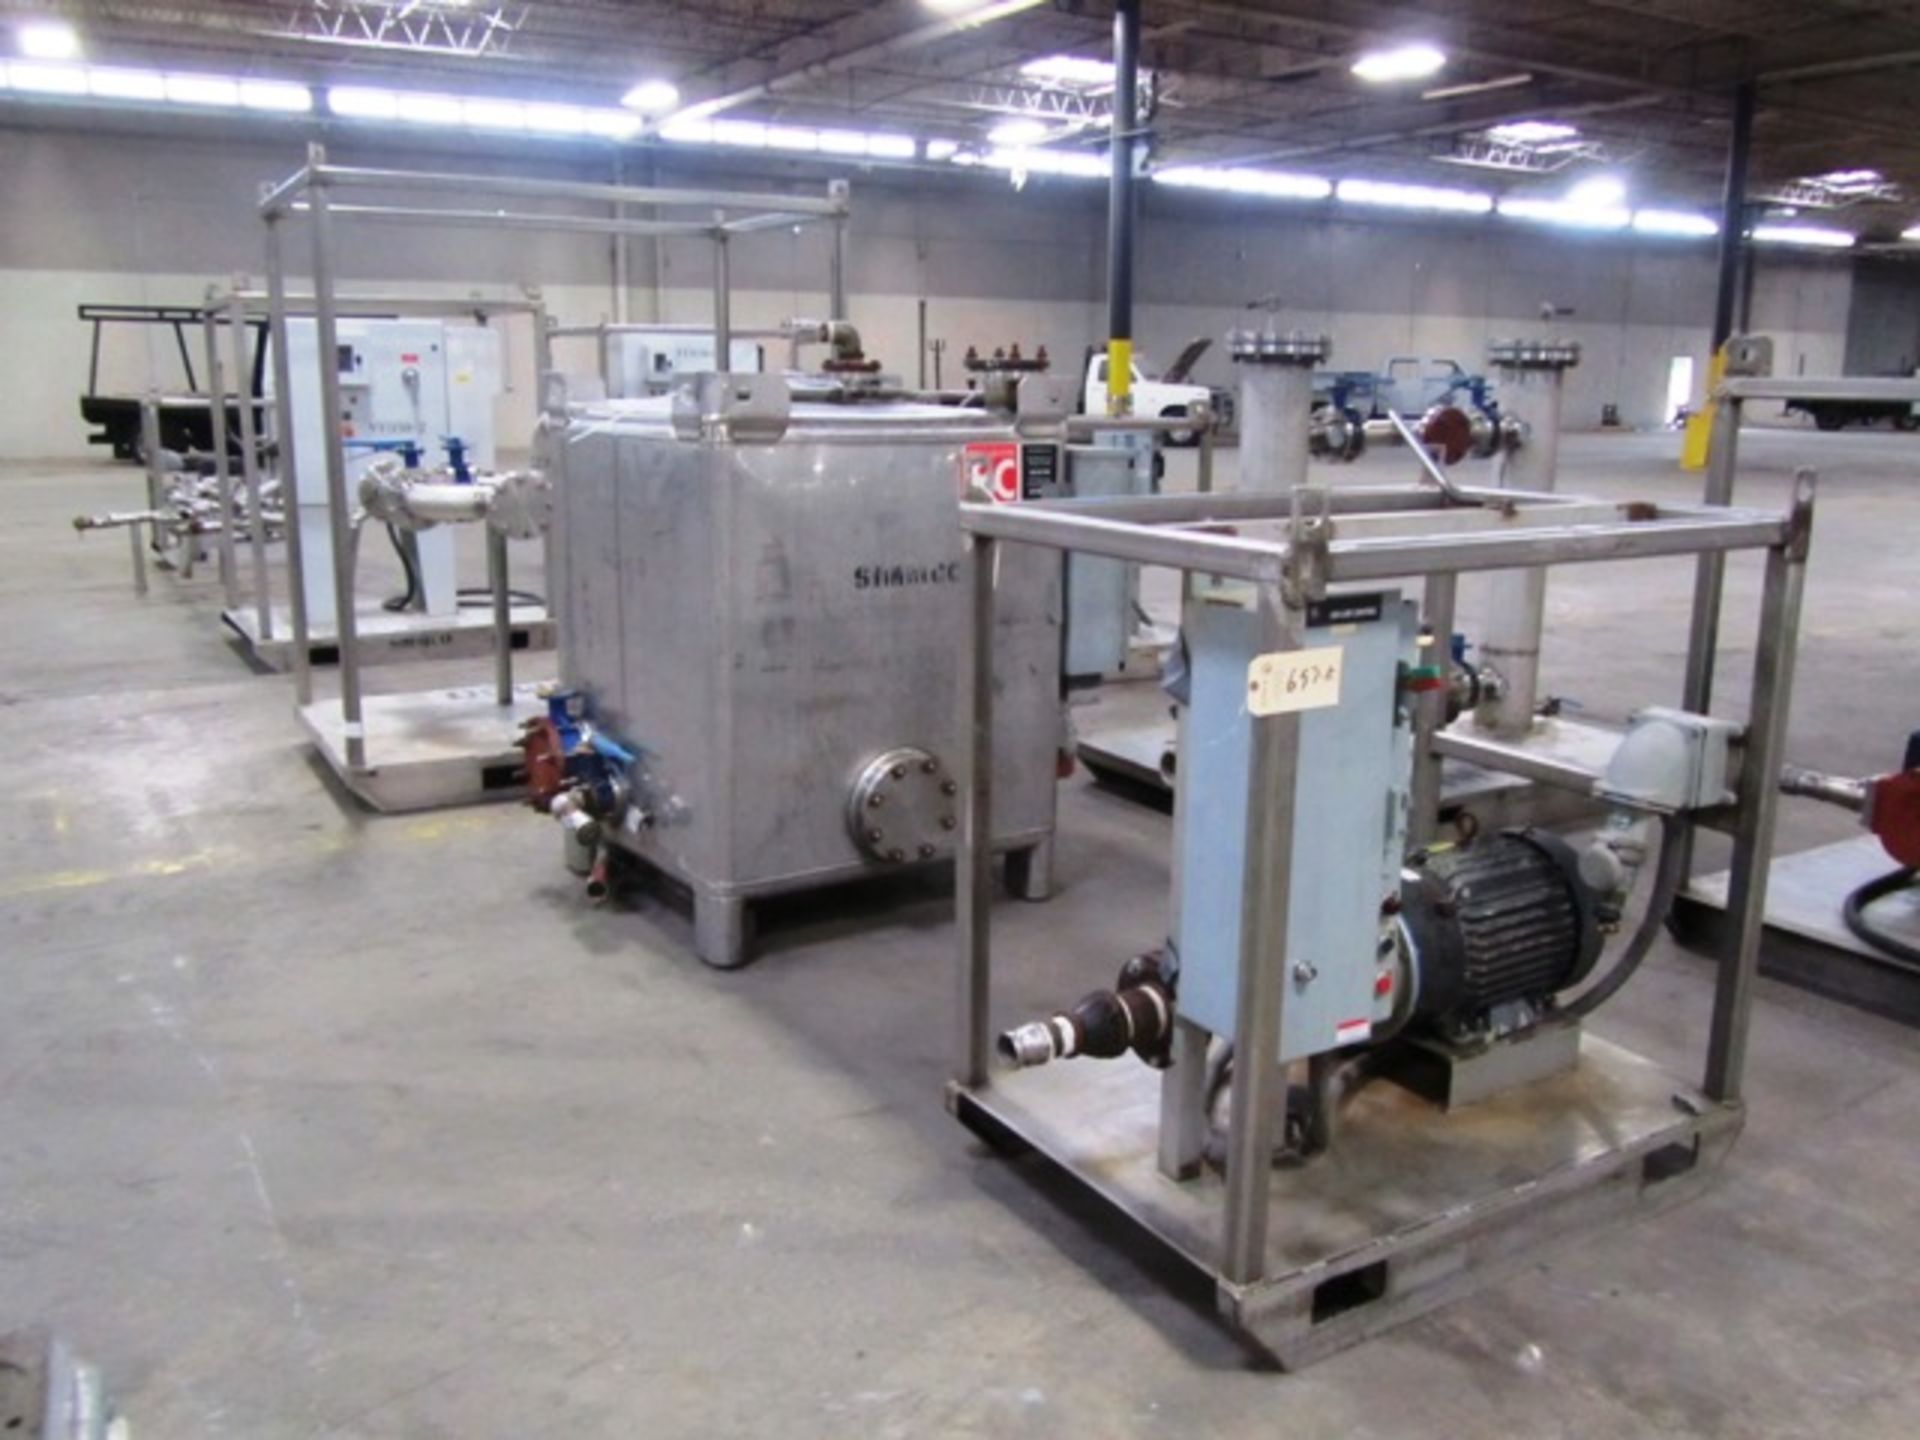 Oil / Water Bypass Pumping System consisting of (2) 25 HP Motors, (1) Splitter Valve Station with